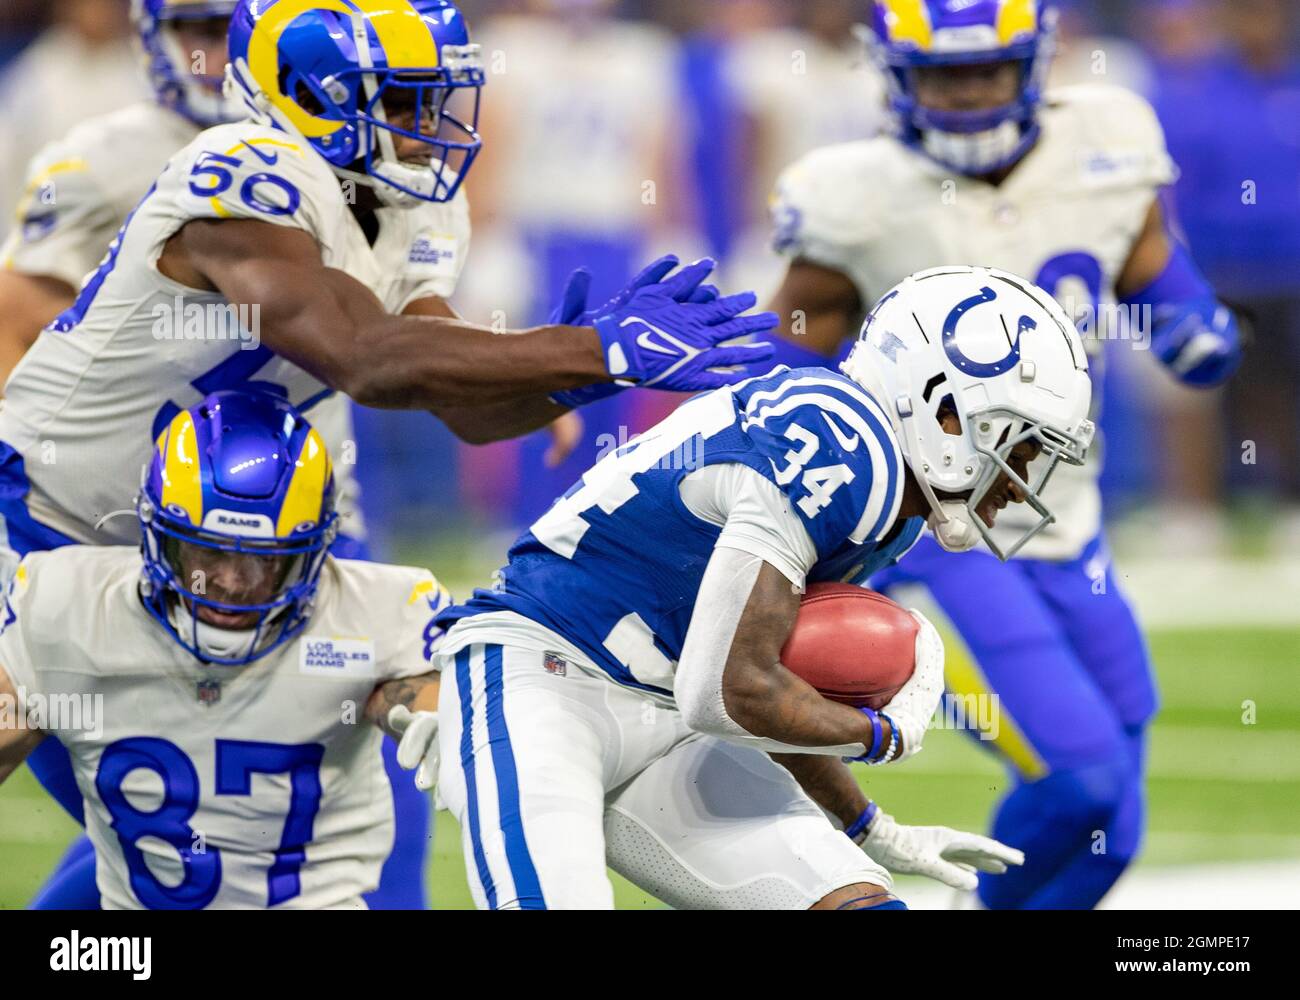 Indianapolis, Indiana, USA. 19th Sep, 2021. Indianapolis Colts defensive back Isaiah Rodgers (34) returns kickoff during NFL football game action between the Los Angeles Rams and the Indianapolis Colts at Lucas Oil Stadium in Indianapolis, Indiana. Los Angeles defeated Indianapolis 27-24. John Mersits/CSM/Alamy Live News Stock Photo